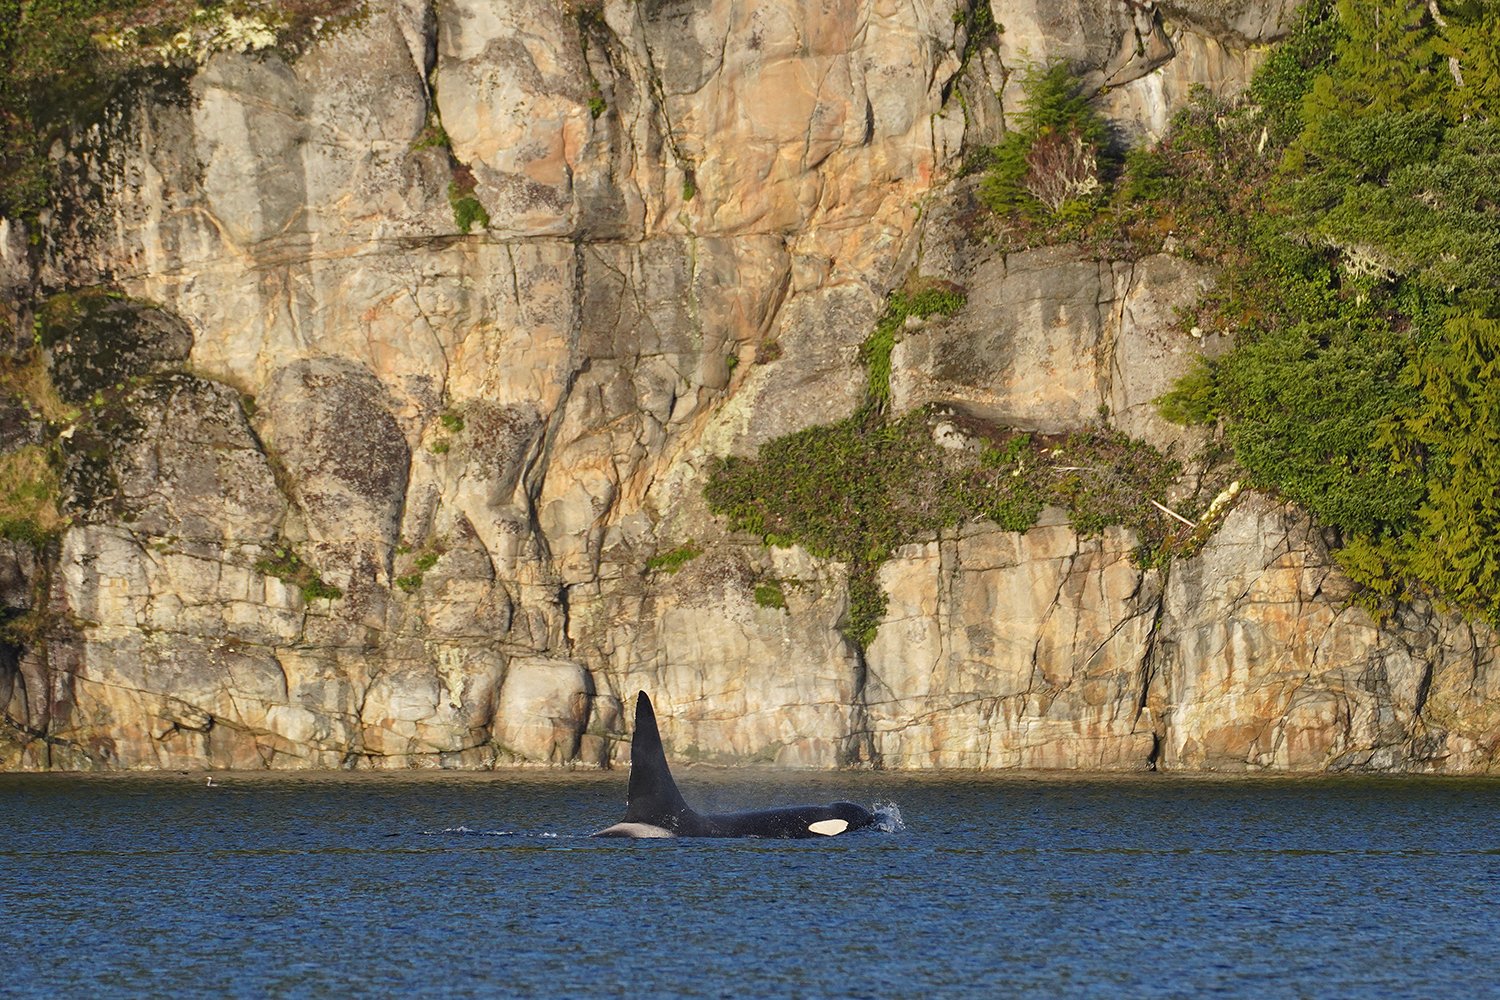 Orca Fife (A60) © Jared Towers